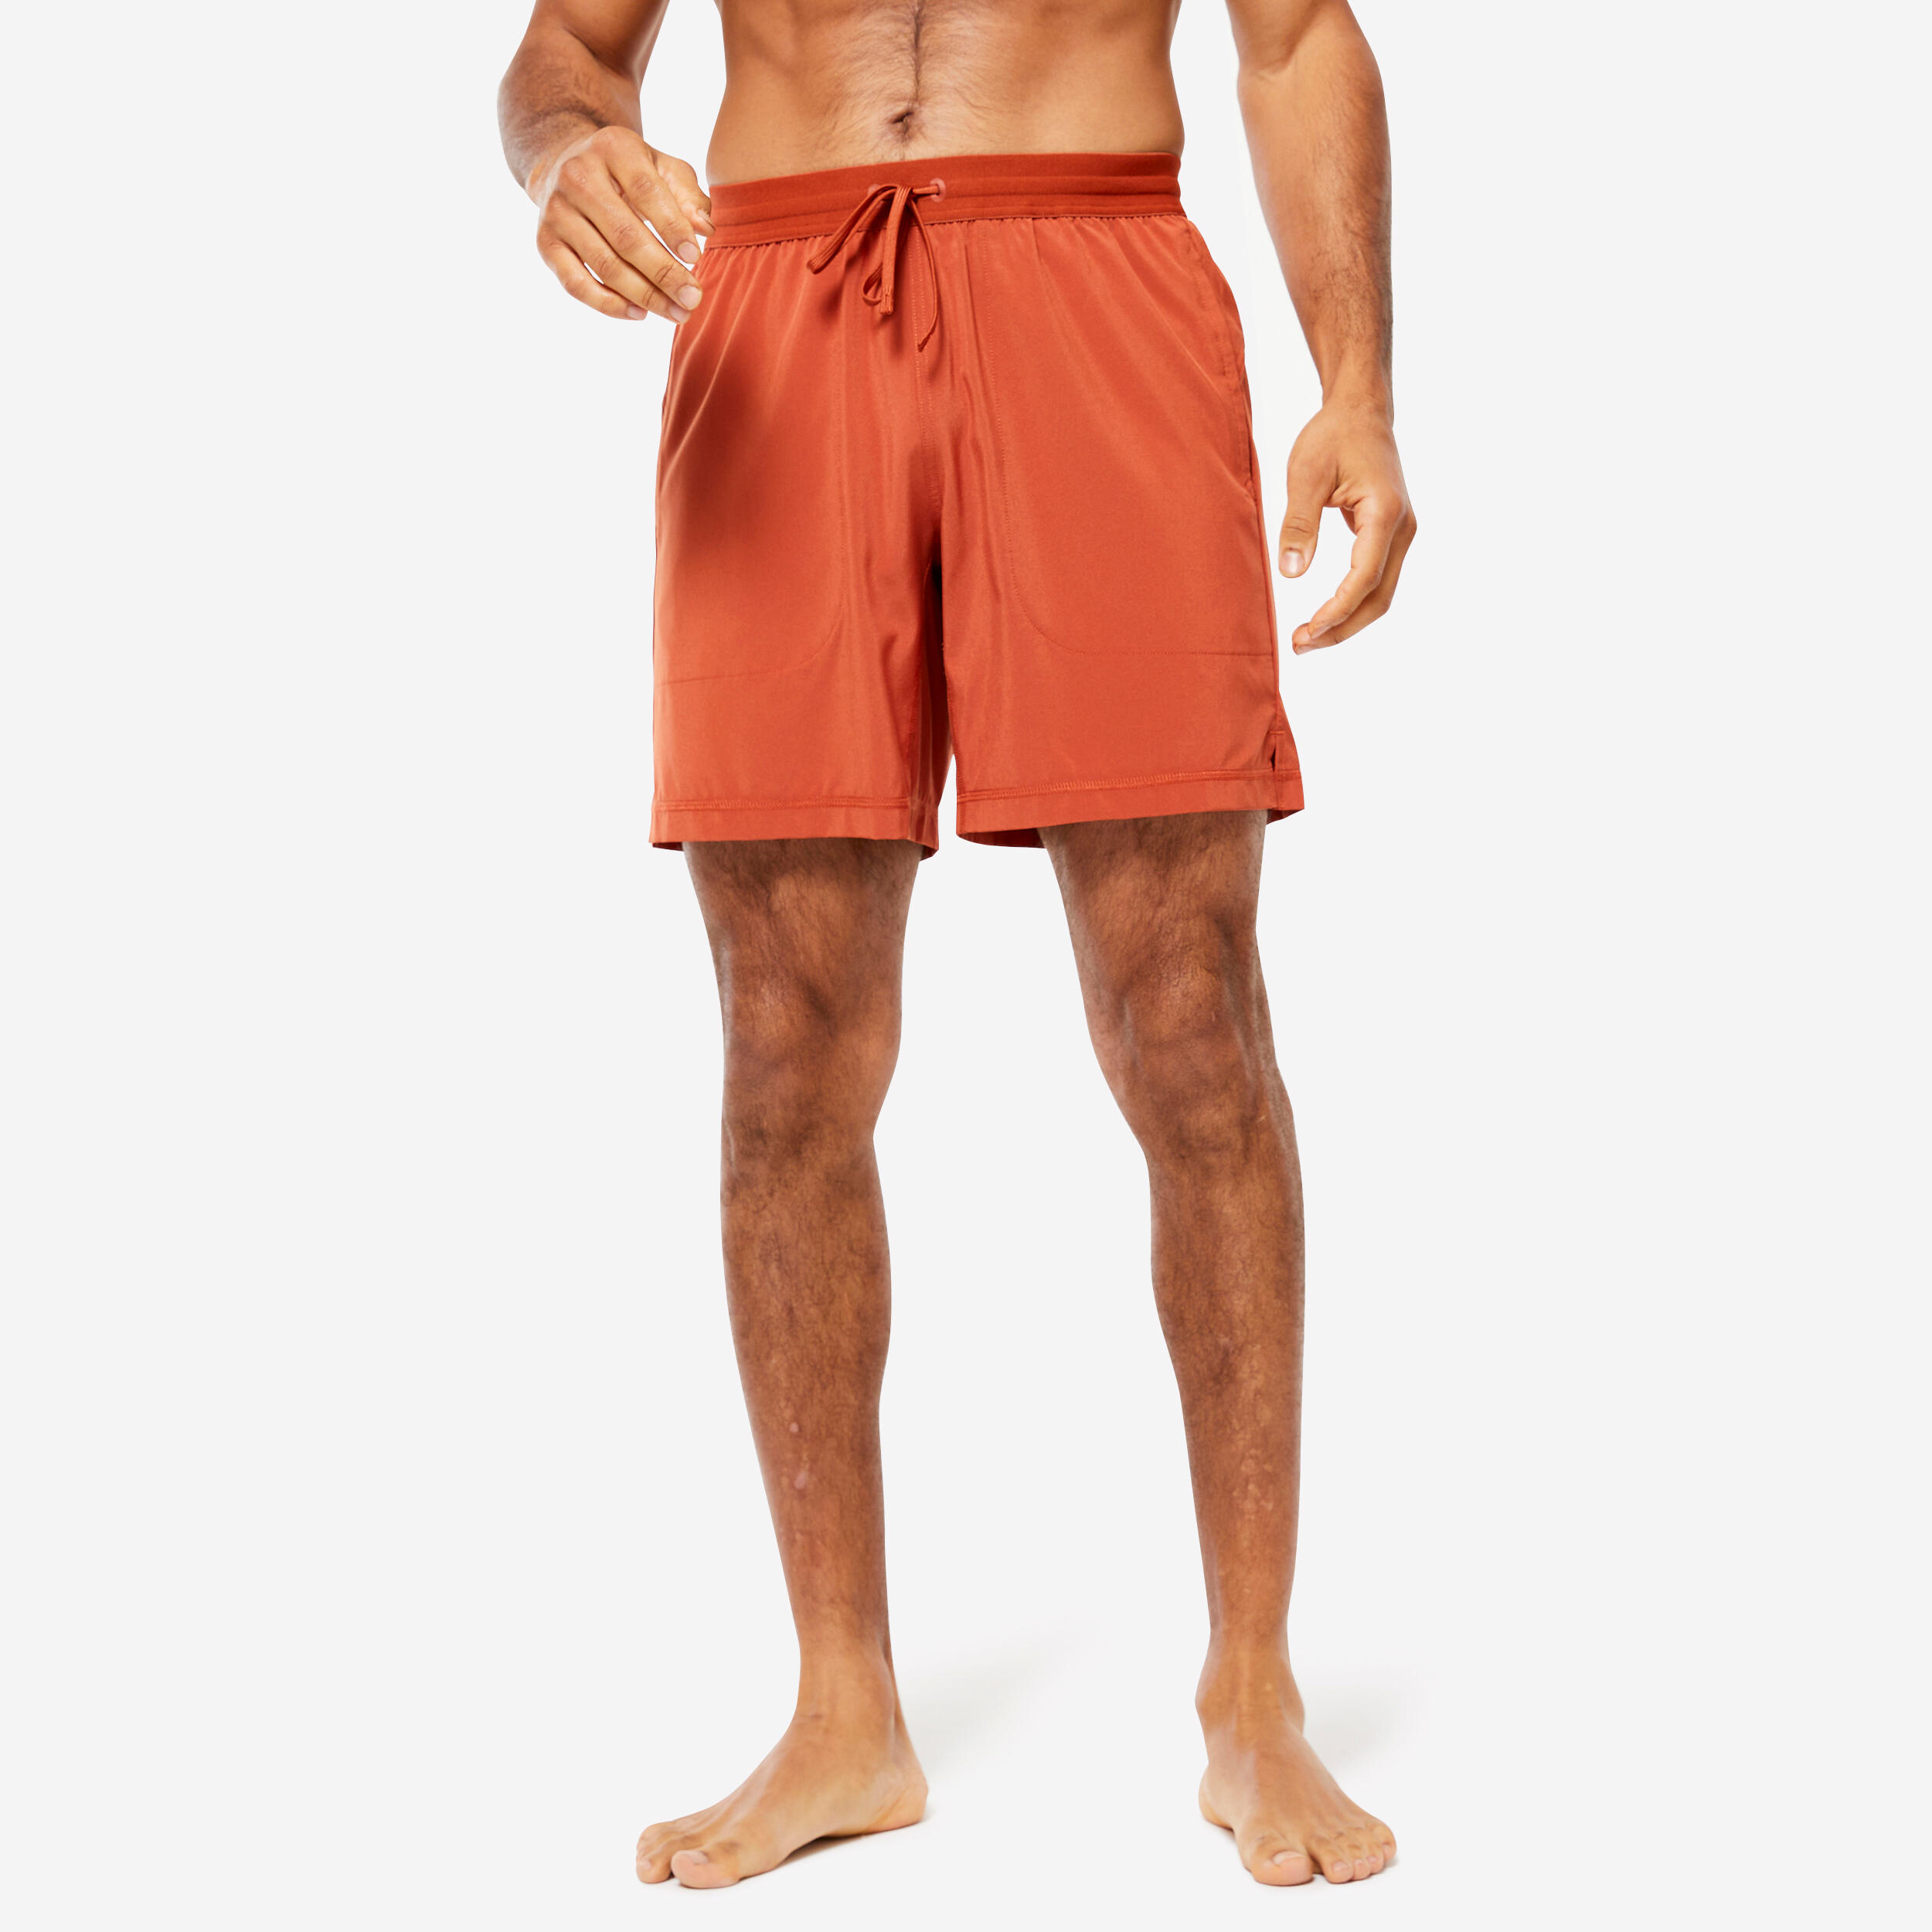 Men's Hot Yoga Ultra-Lightweight Shorts with Built-in Briefs